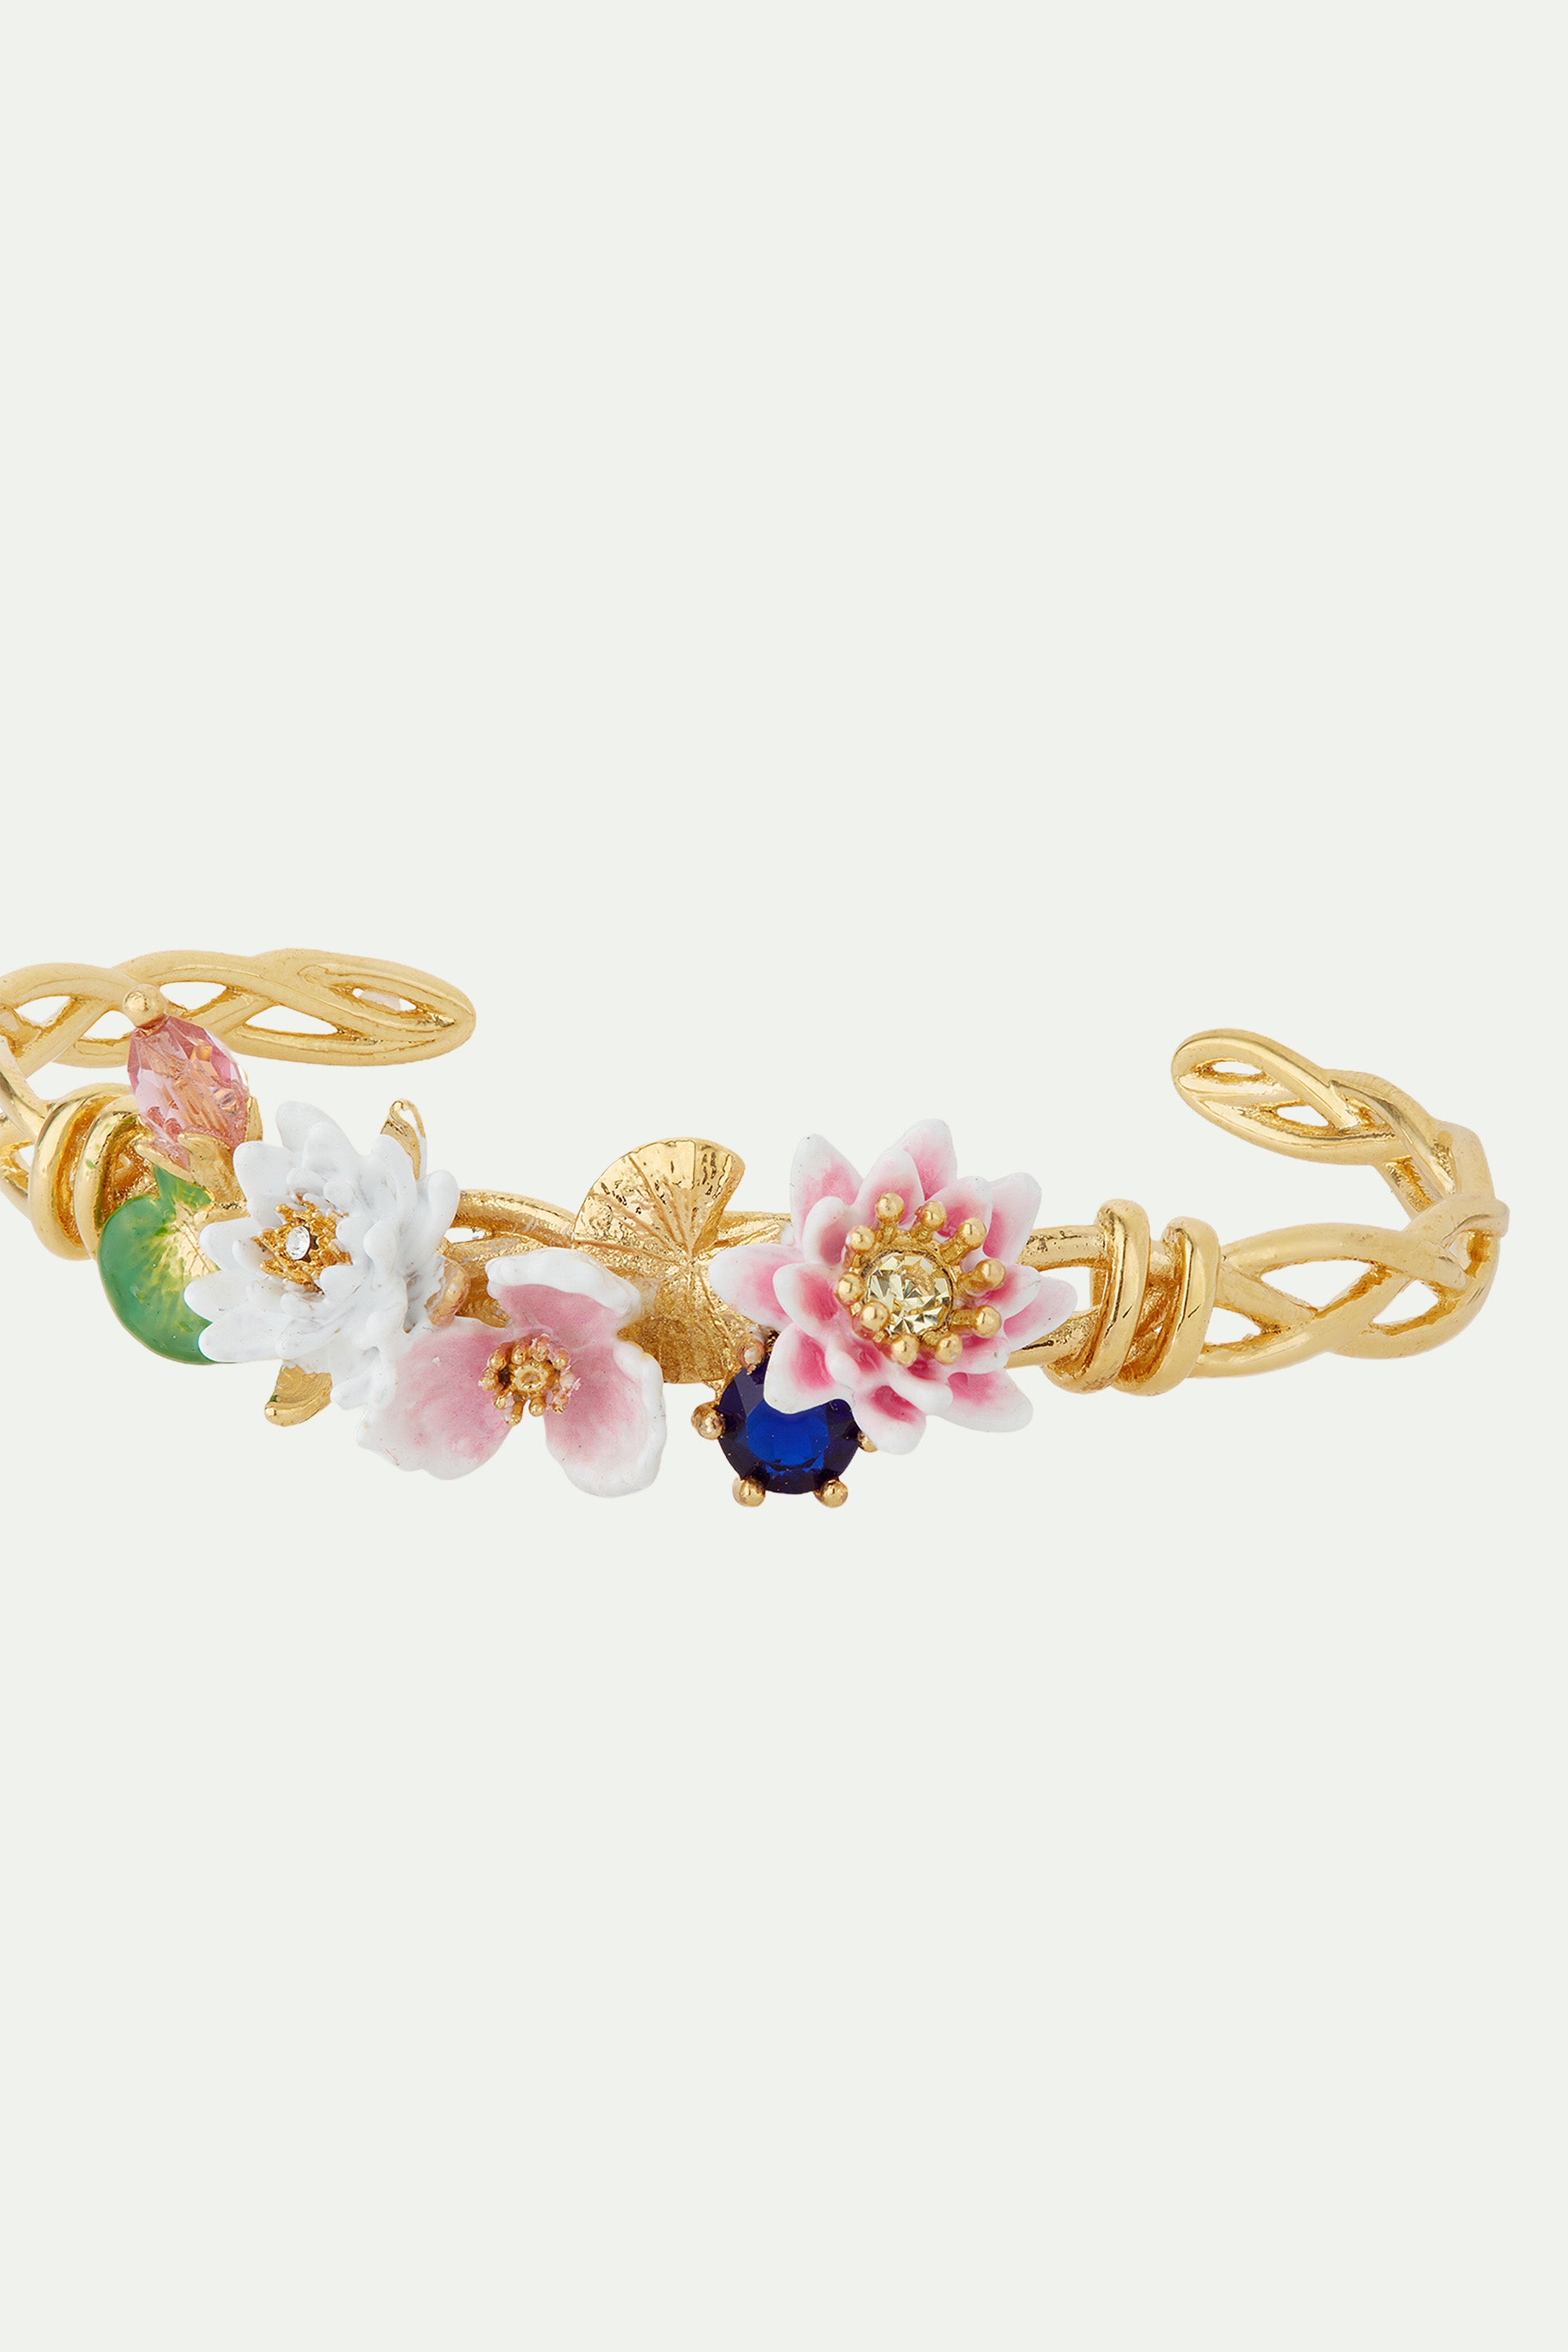 Water lily garden and blue stone bangle bracelet